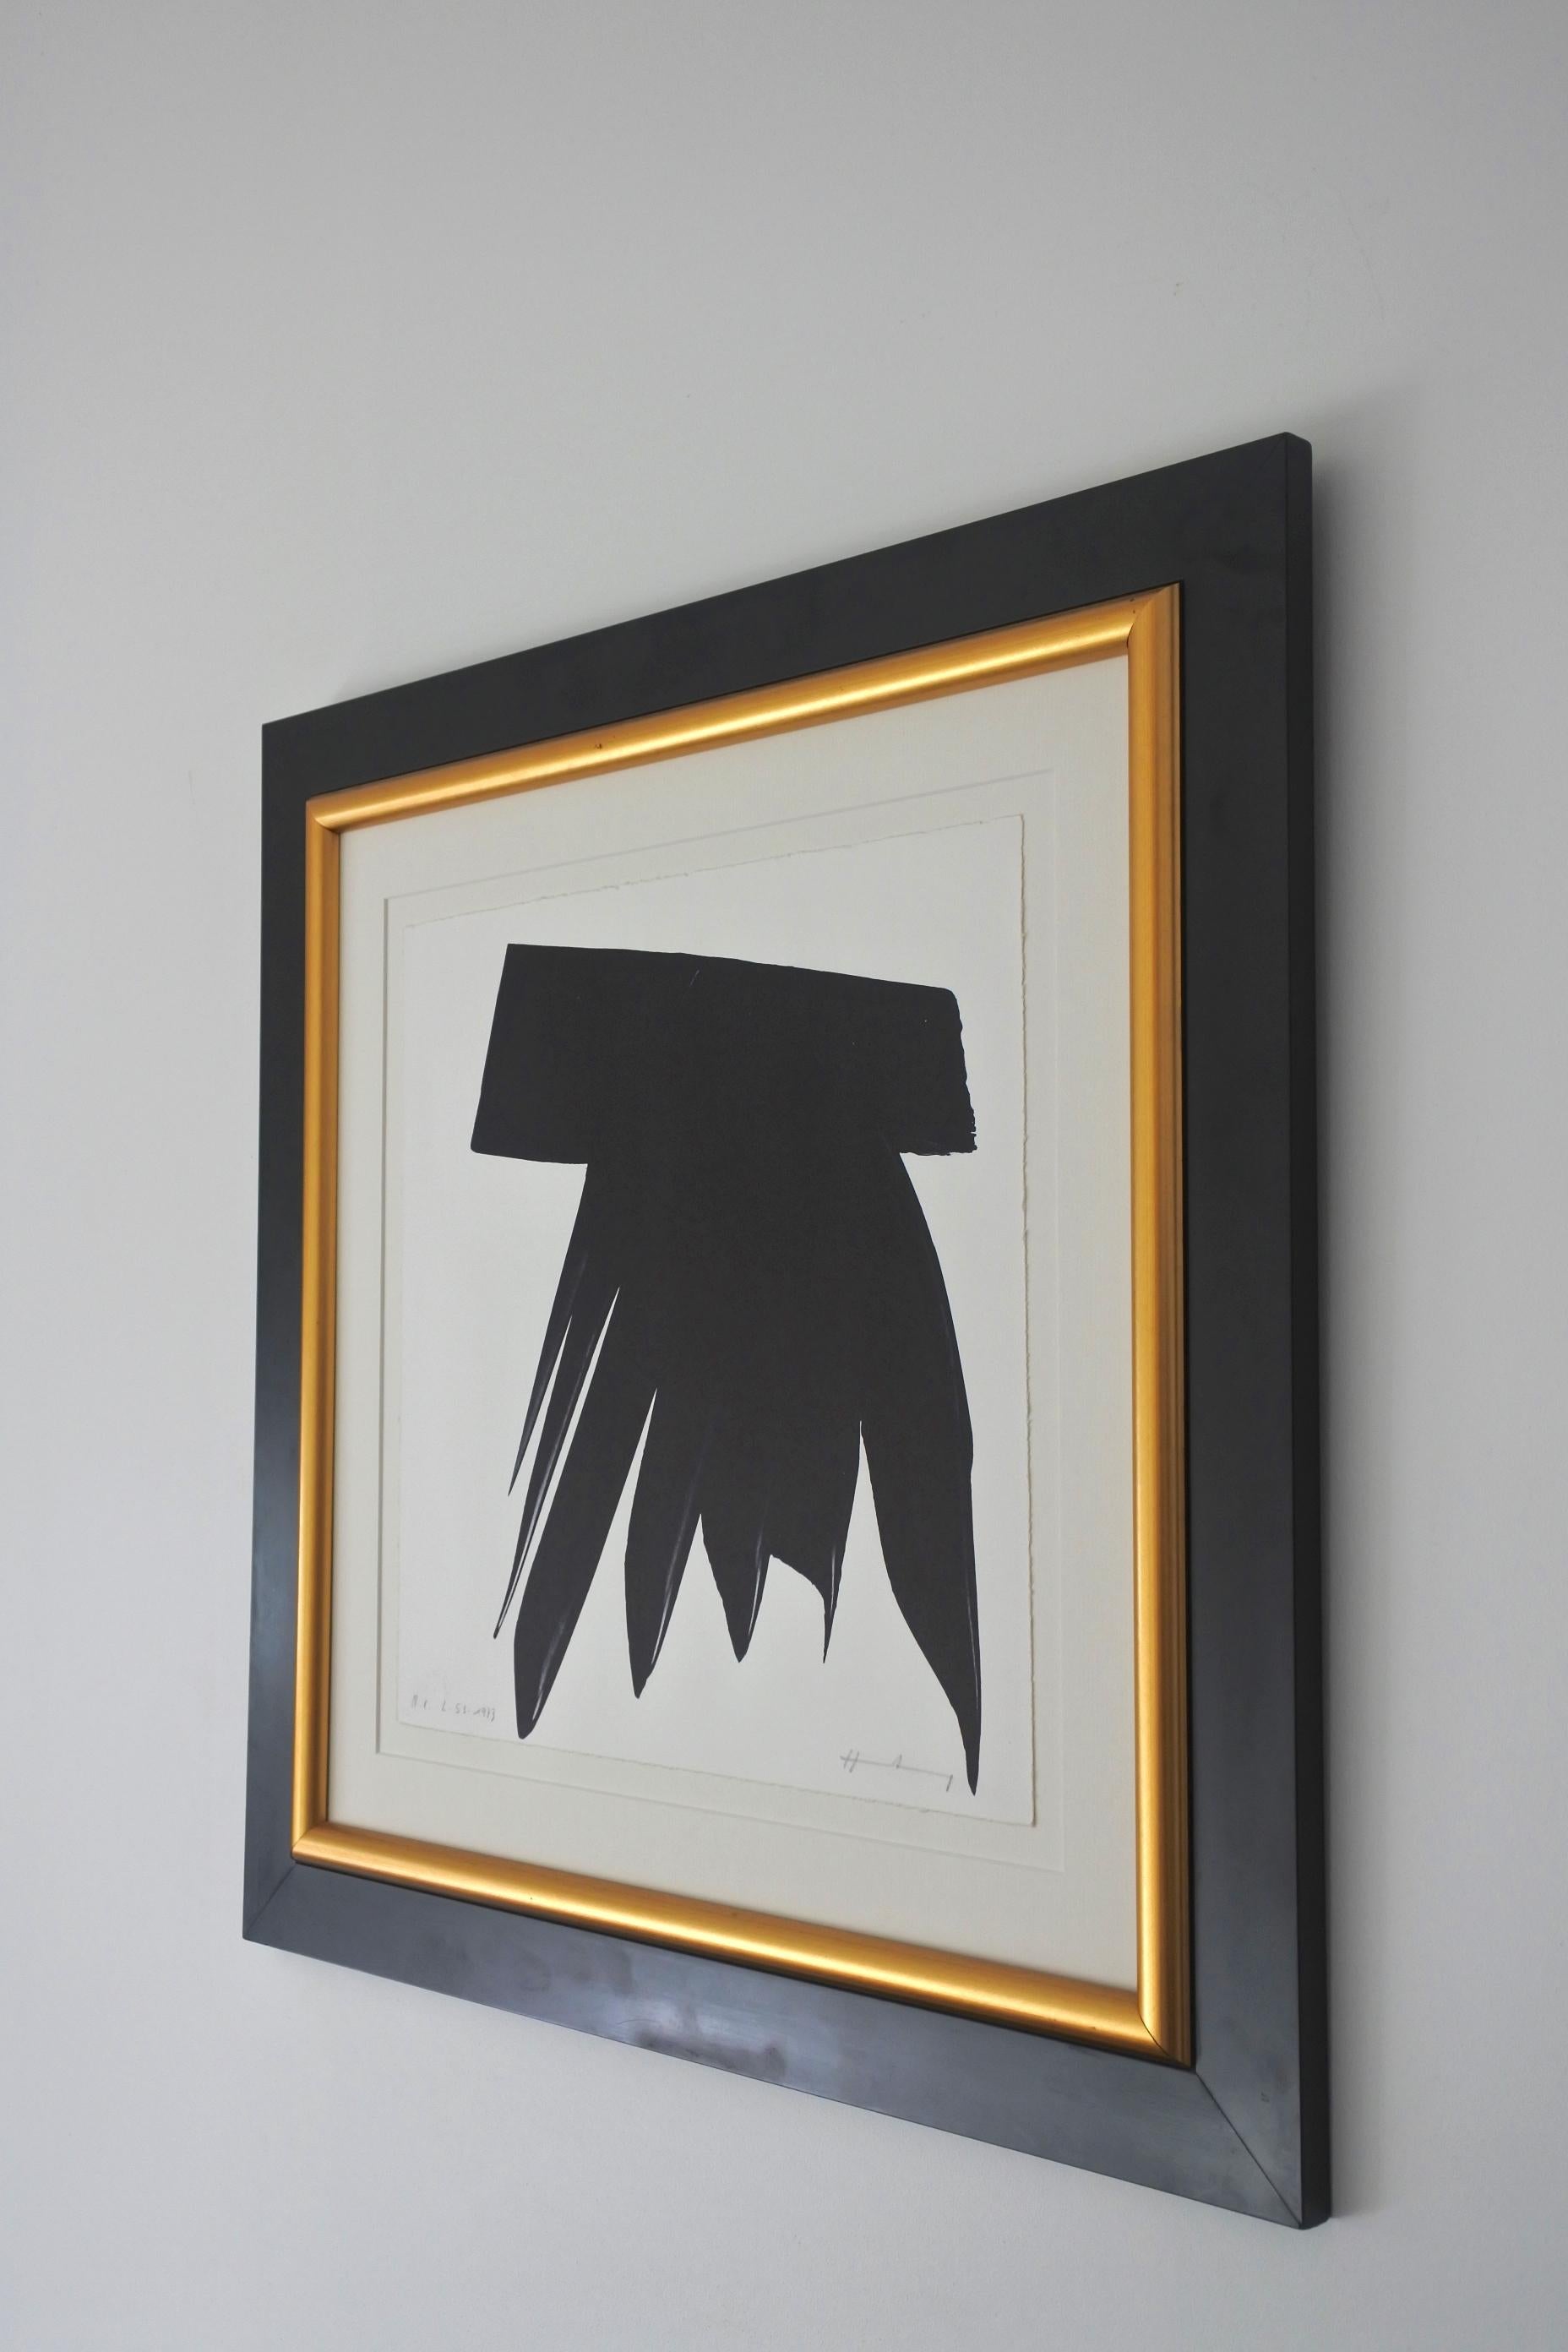 Framed lithograph print by Hans Hartung.
Edited by Erker, Saint Gallen.
Referenced in the Erker catalogue, number L 53
Edition of 75 + EA + HC.
Pencil signed and dated 